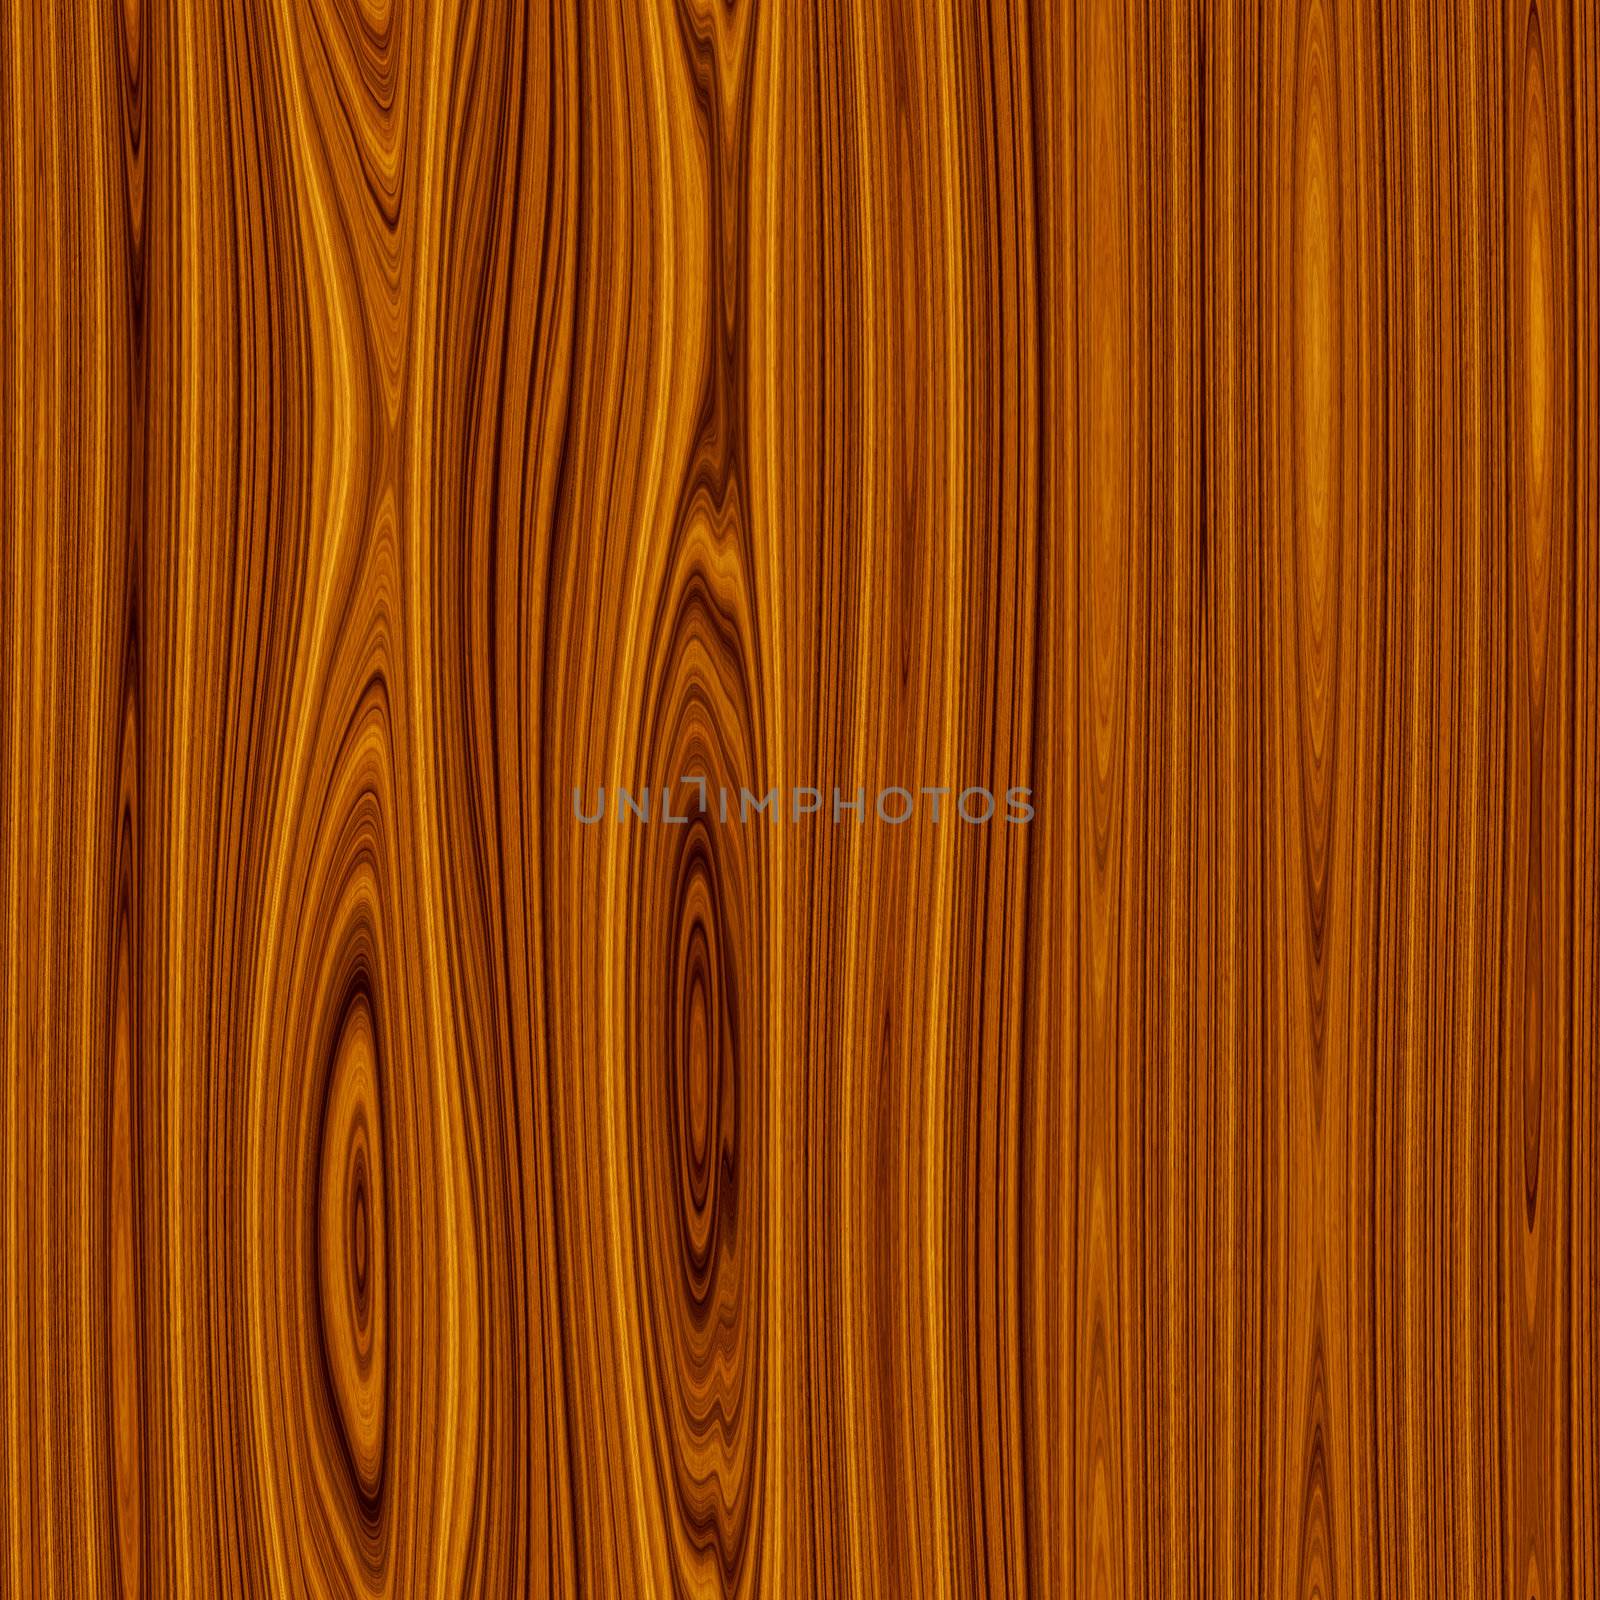 photorealistic wood veneer, will tile seamlessly as a pattern

